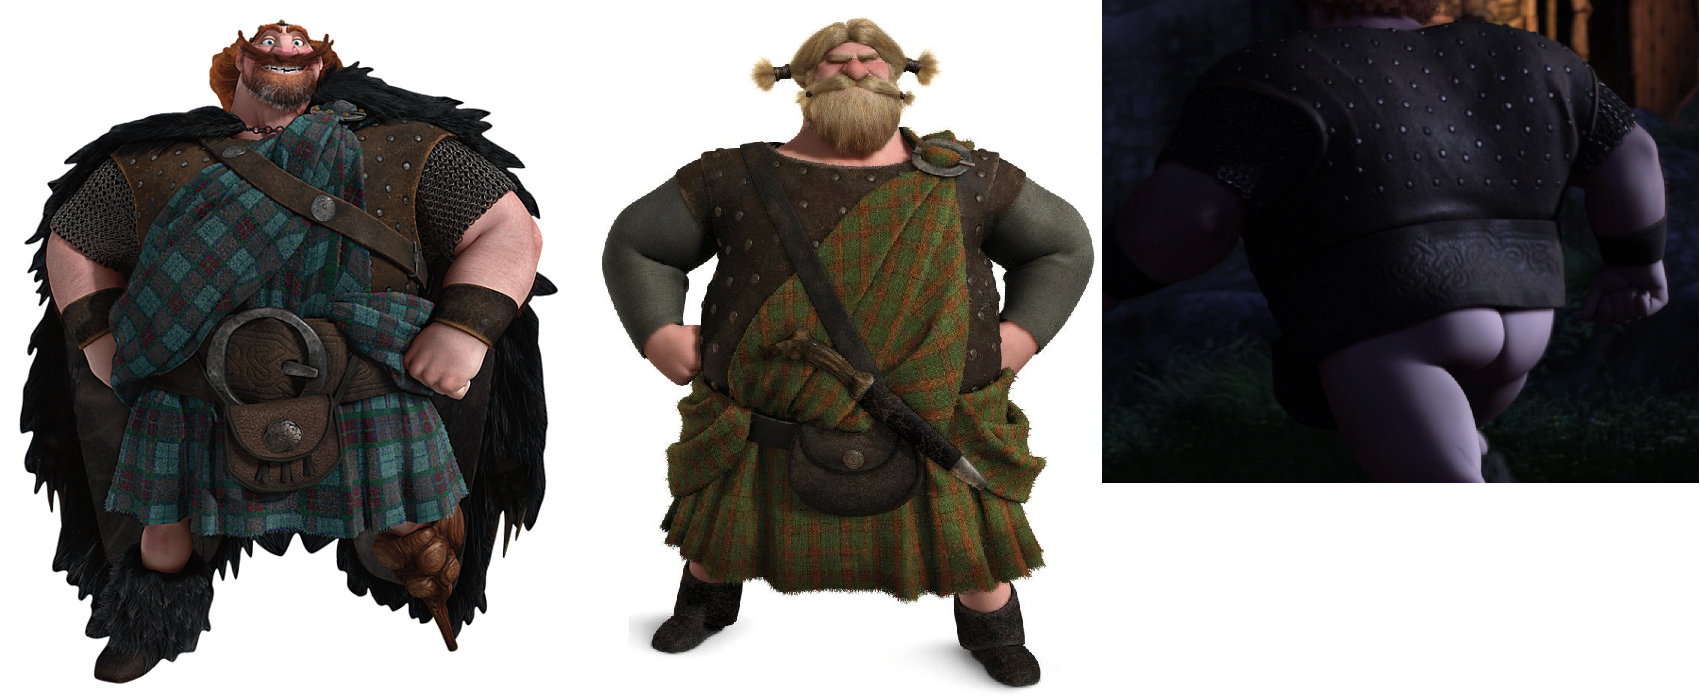 Requesting King Fergus and Lord Macguffin from Brave in a scene where Fergu...